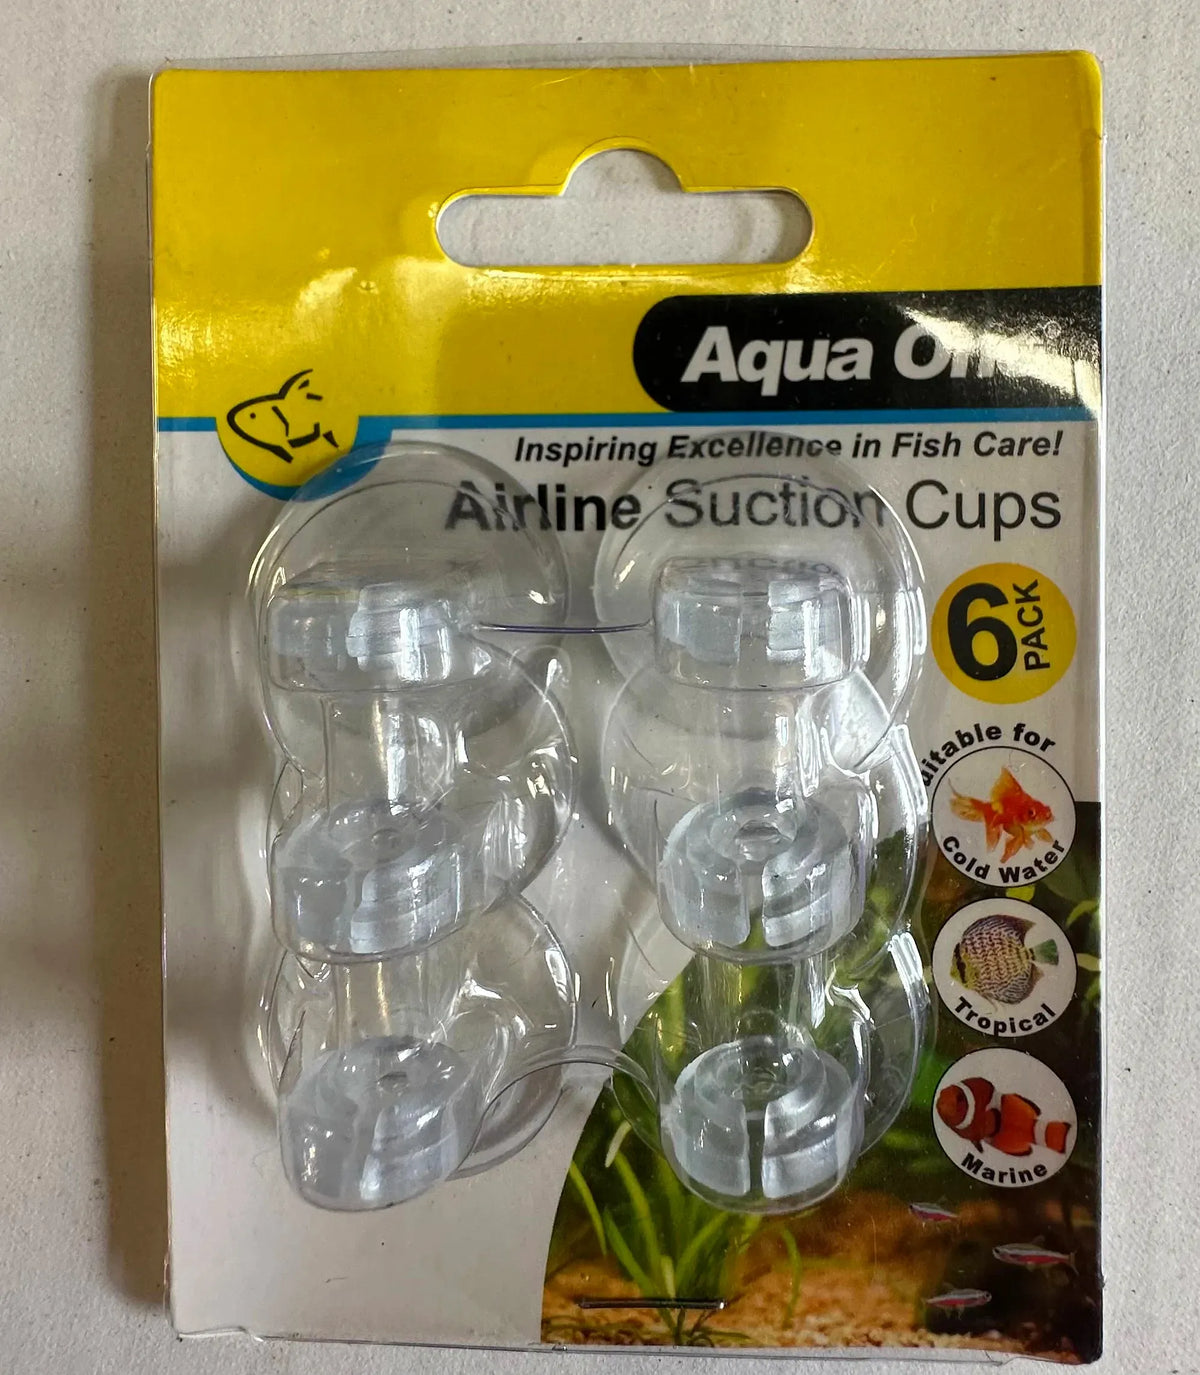 Aqua One Airline Suction Cups (6pk)